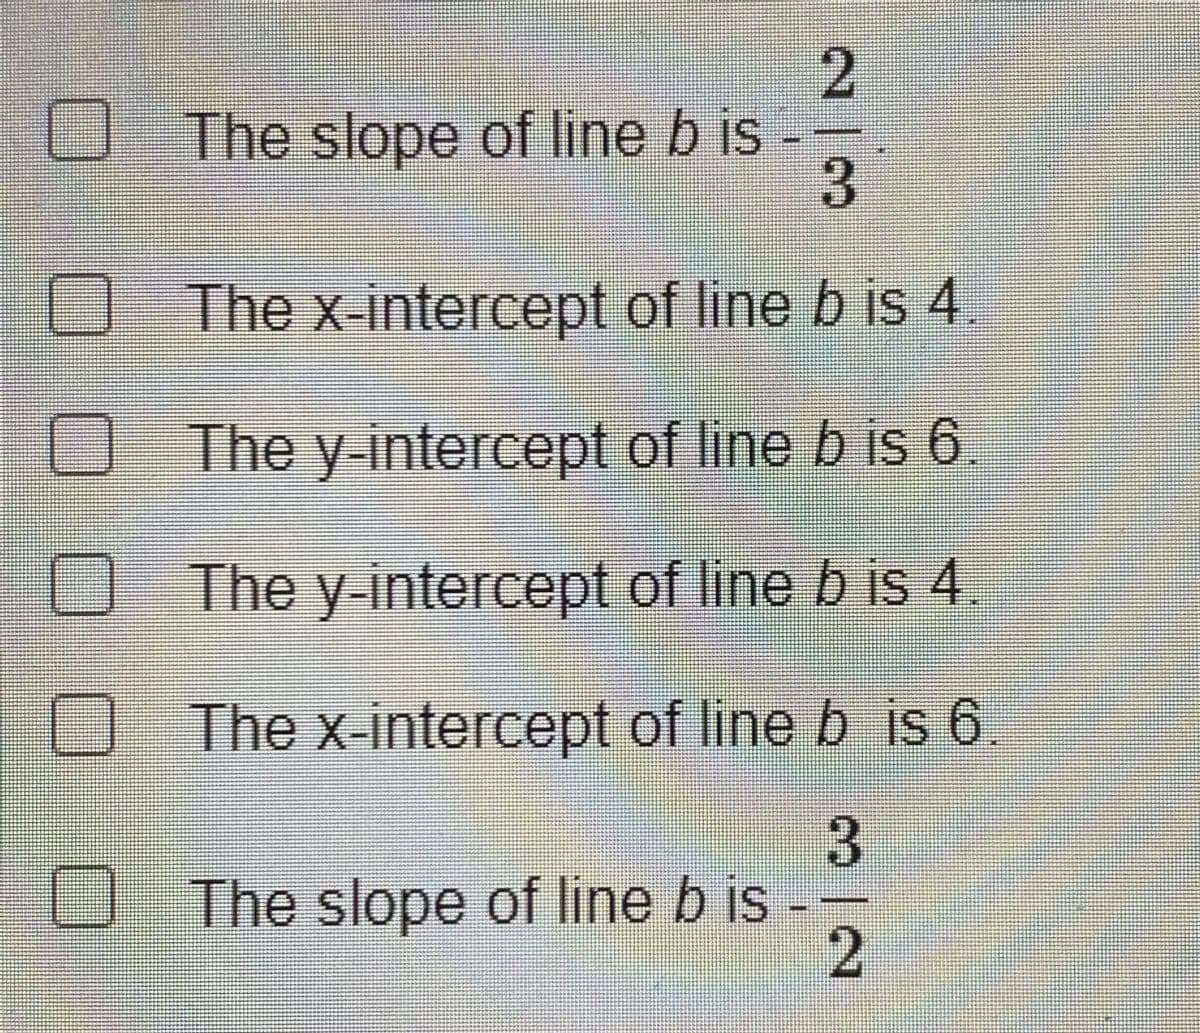 The slope of line b is
3
O The x-intercept of line b is 4.
O The y-intercept of line b is 6
O The y intercept of line b is 4.
The x-intercept of lineb js 6.
The slope of line b is --
23
3/2
